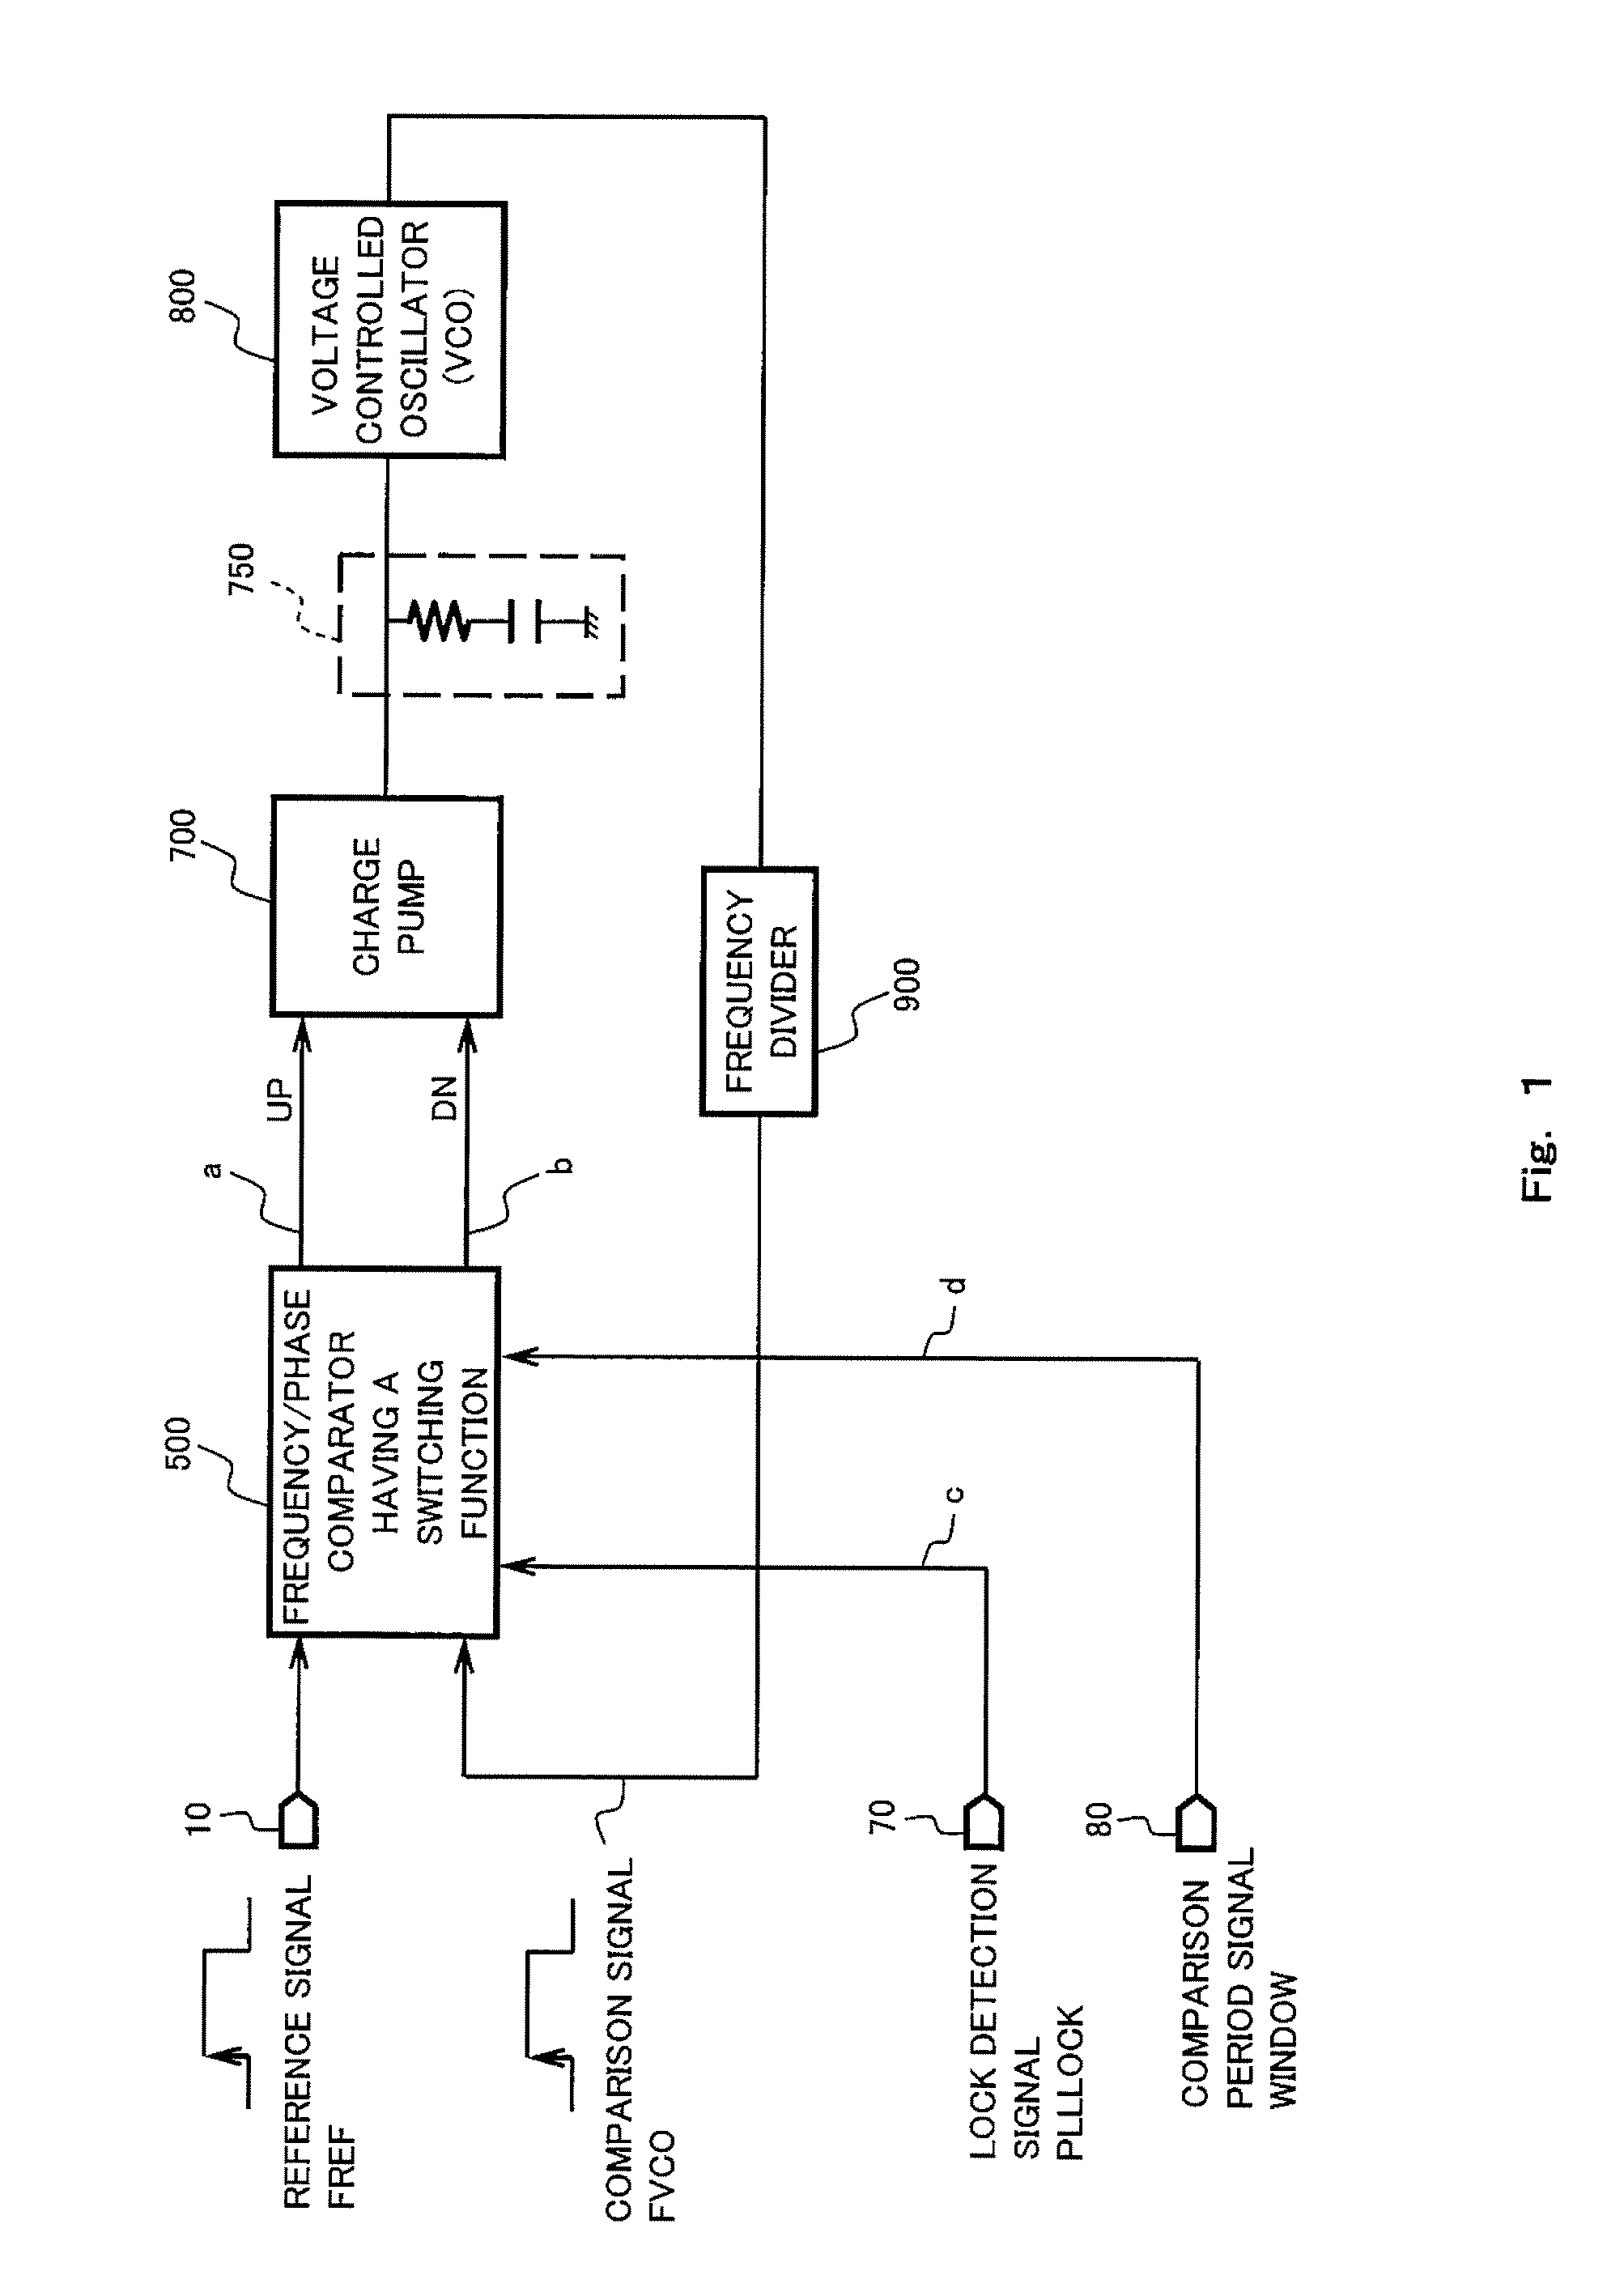 Pll circuit for reducing reference leak and phase noise